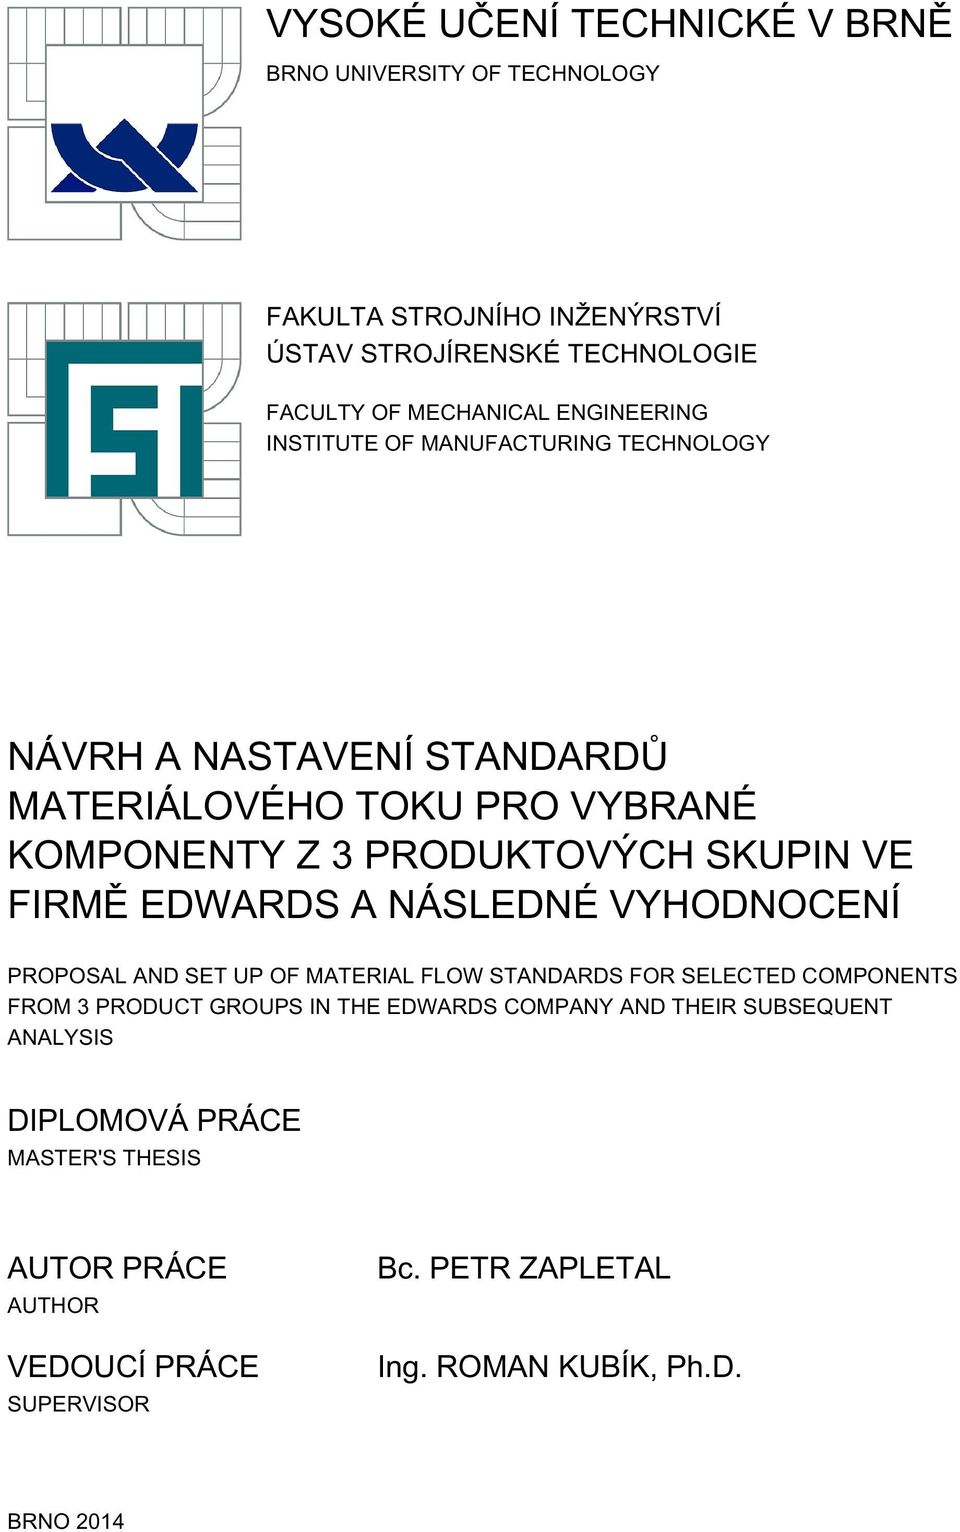 FIRMĚ EDWARDS A NÁSLEDNÉ VYHODNOCENÍ PROPOSAL AND SET UP OF MATERIAL FLOW STANDARDS FOR SELECTED COMPONENTS FROM 3 PRODUCT GROUPS IN THE EDWARDS